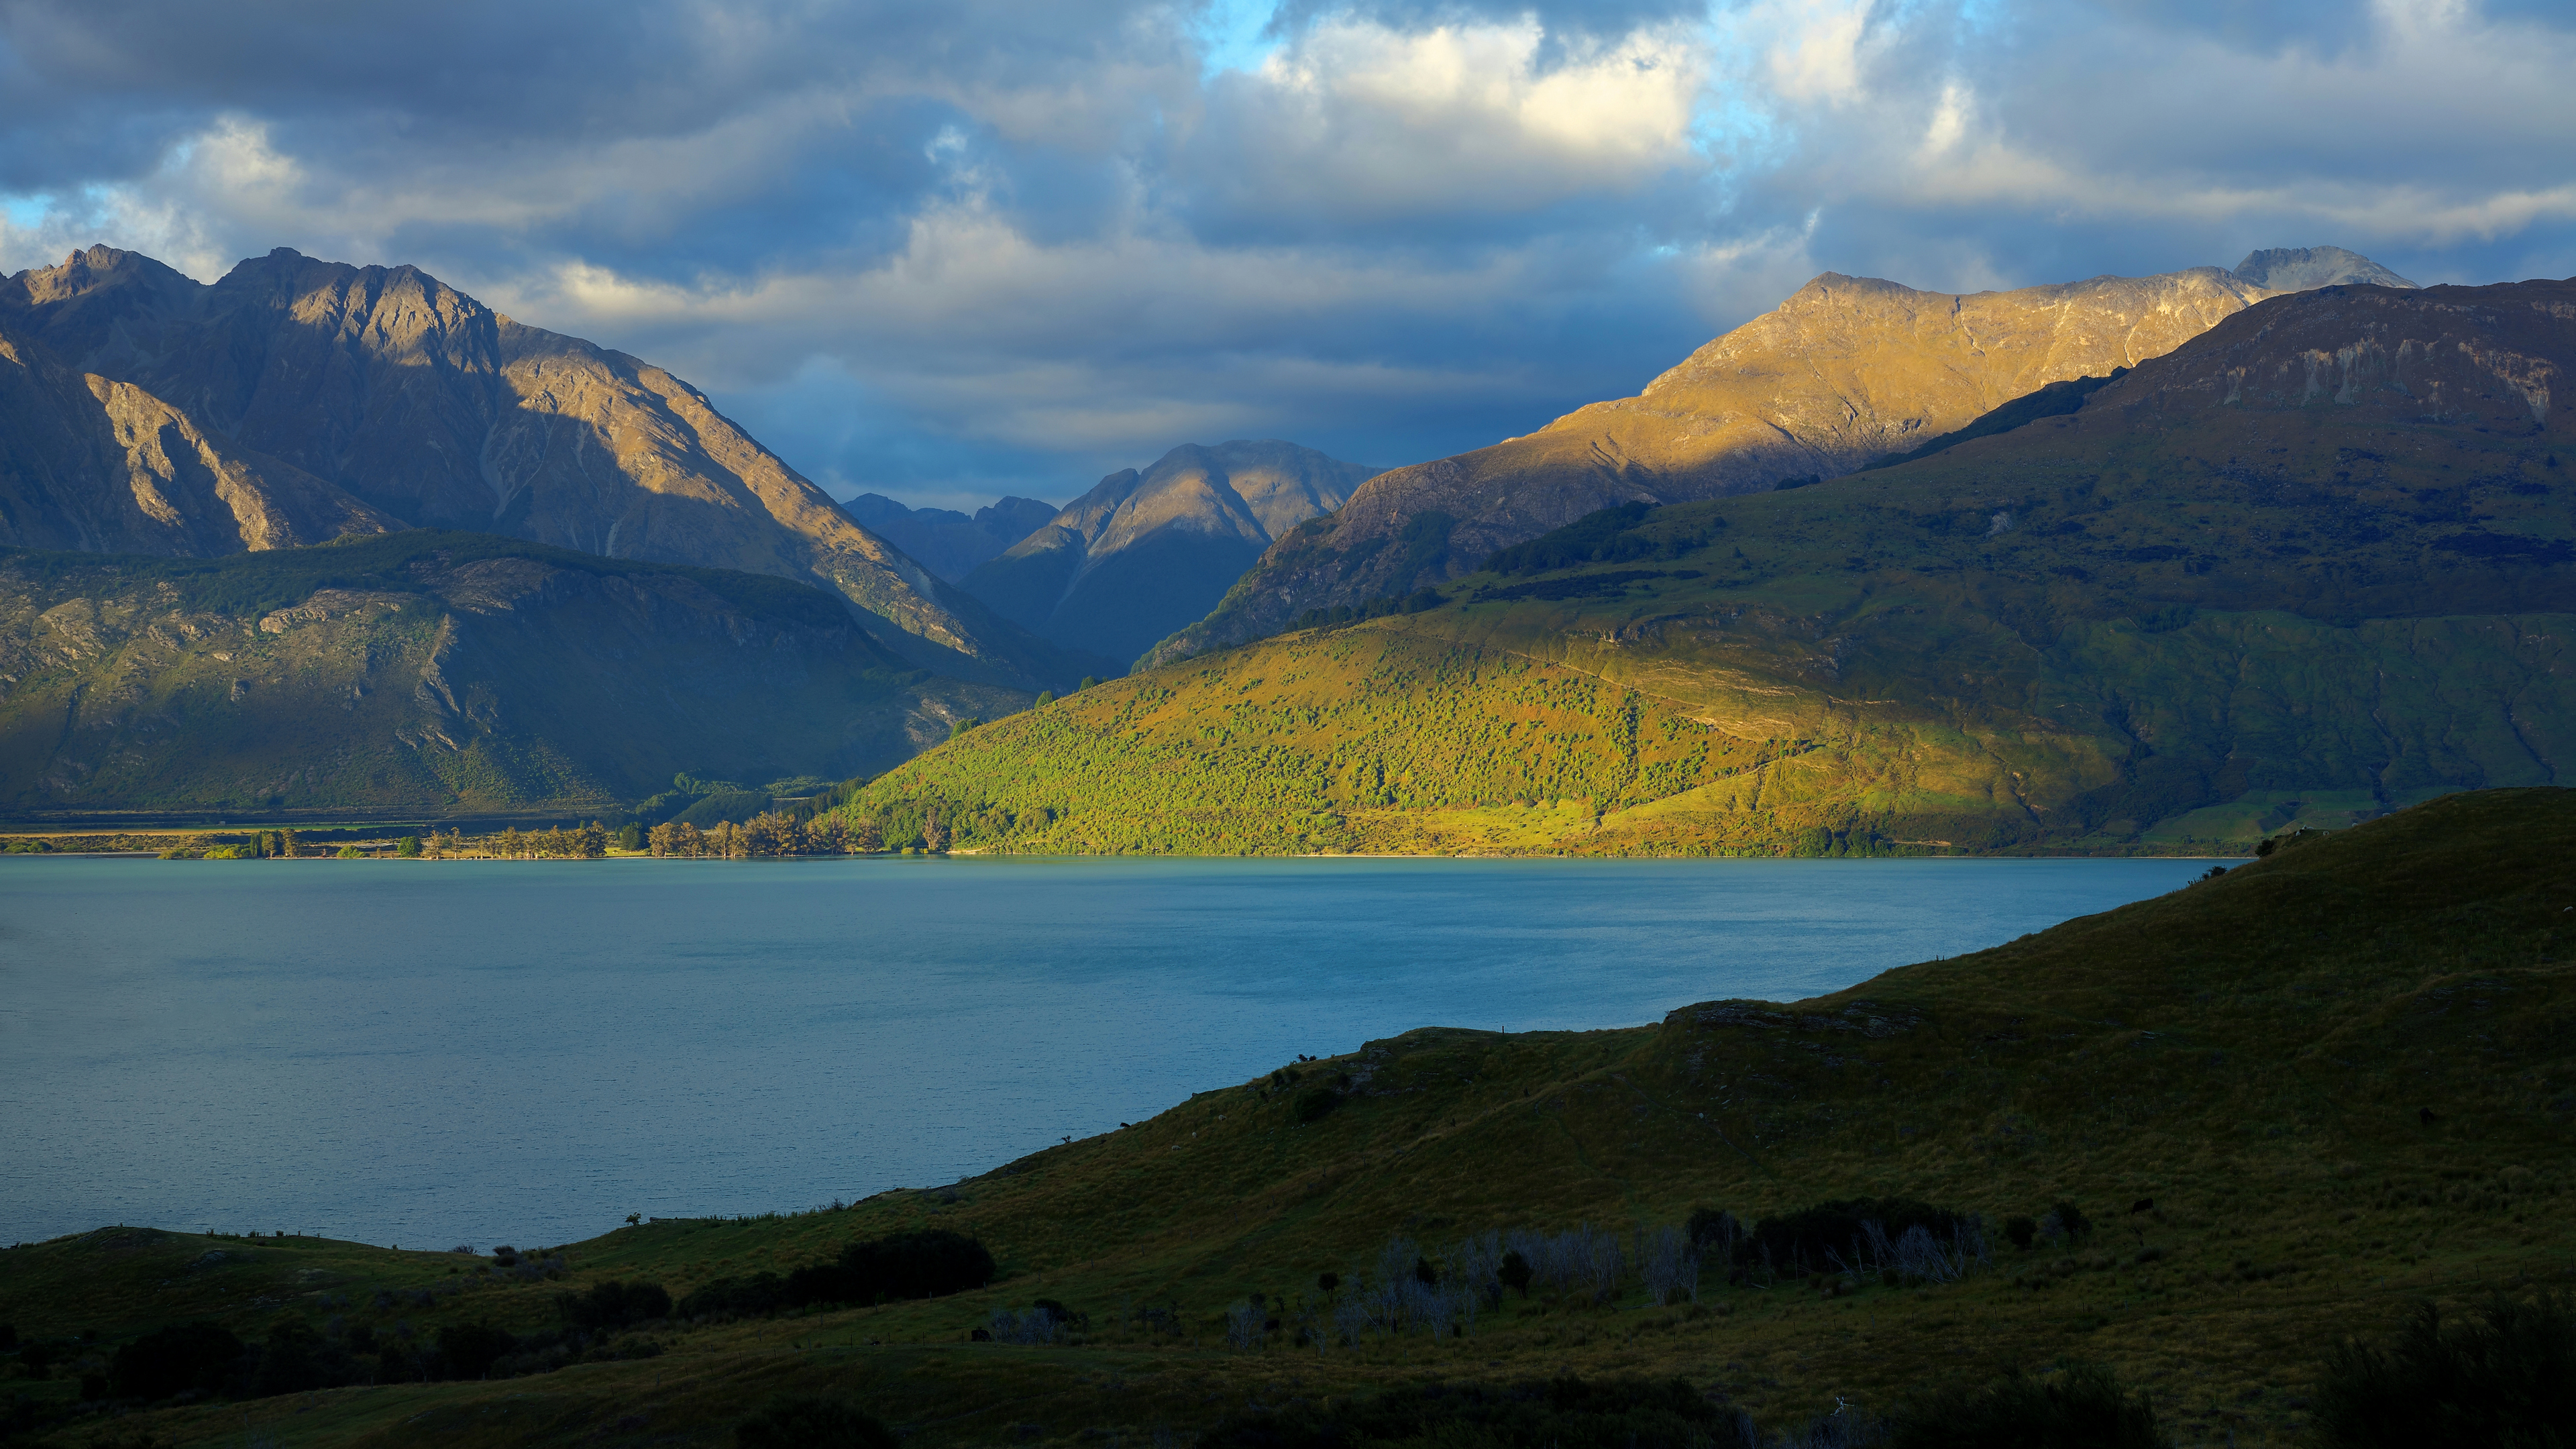 General 3840x2160 Trey Ratcliff photography landscape New Zealand nature mountains water clouds